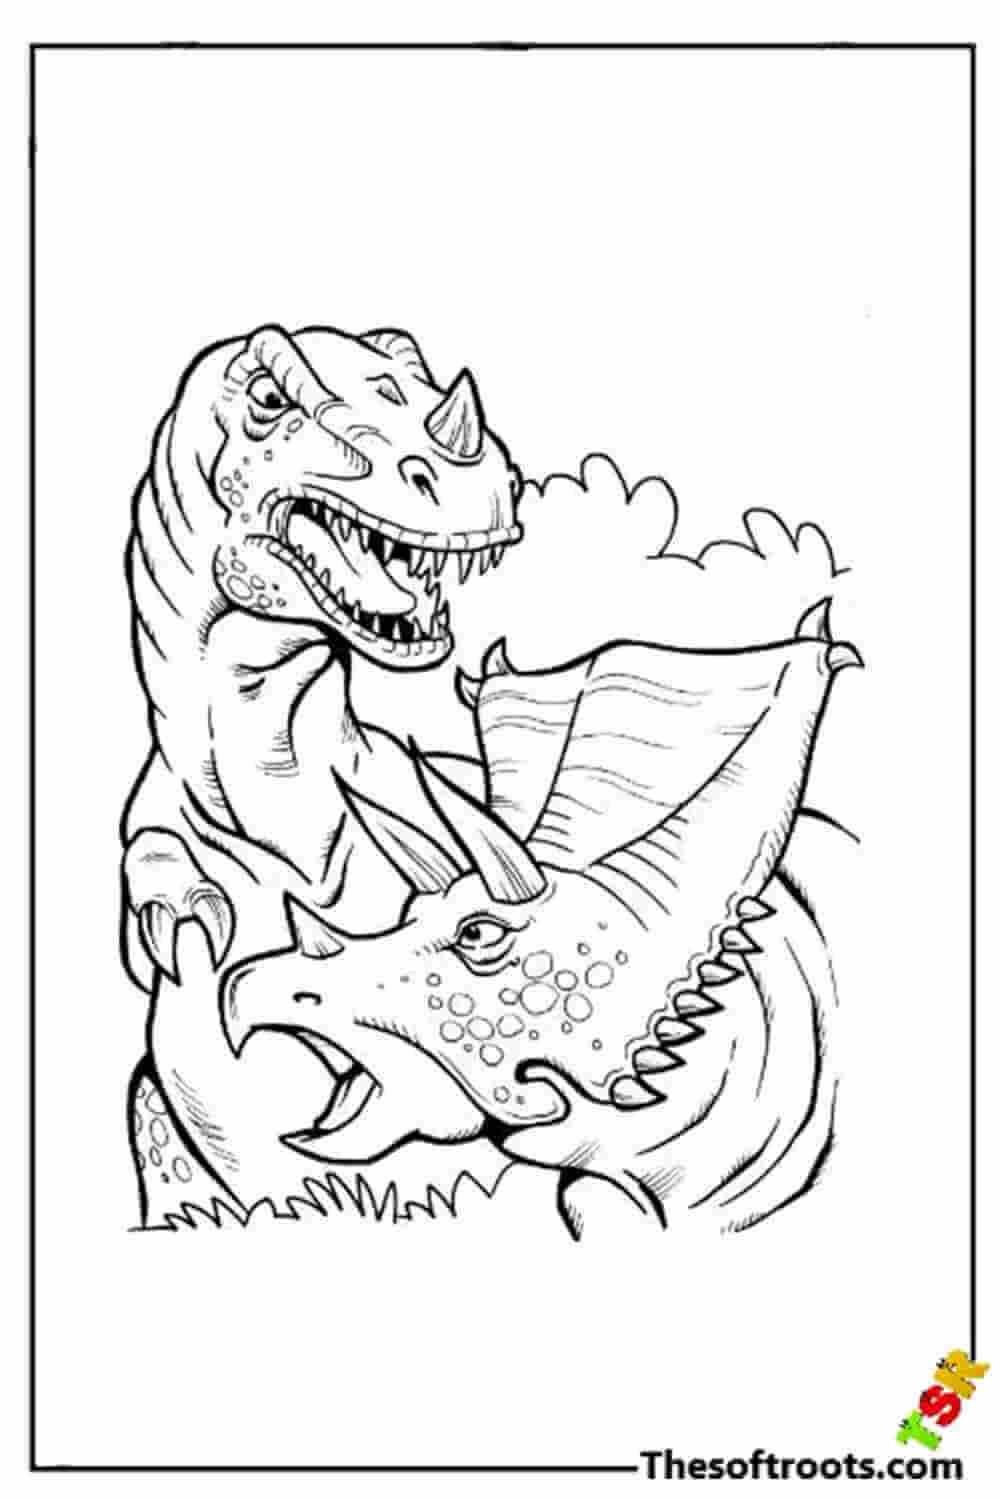 T-Rex vs. Dicynodont Dinosaurs coloring pages